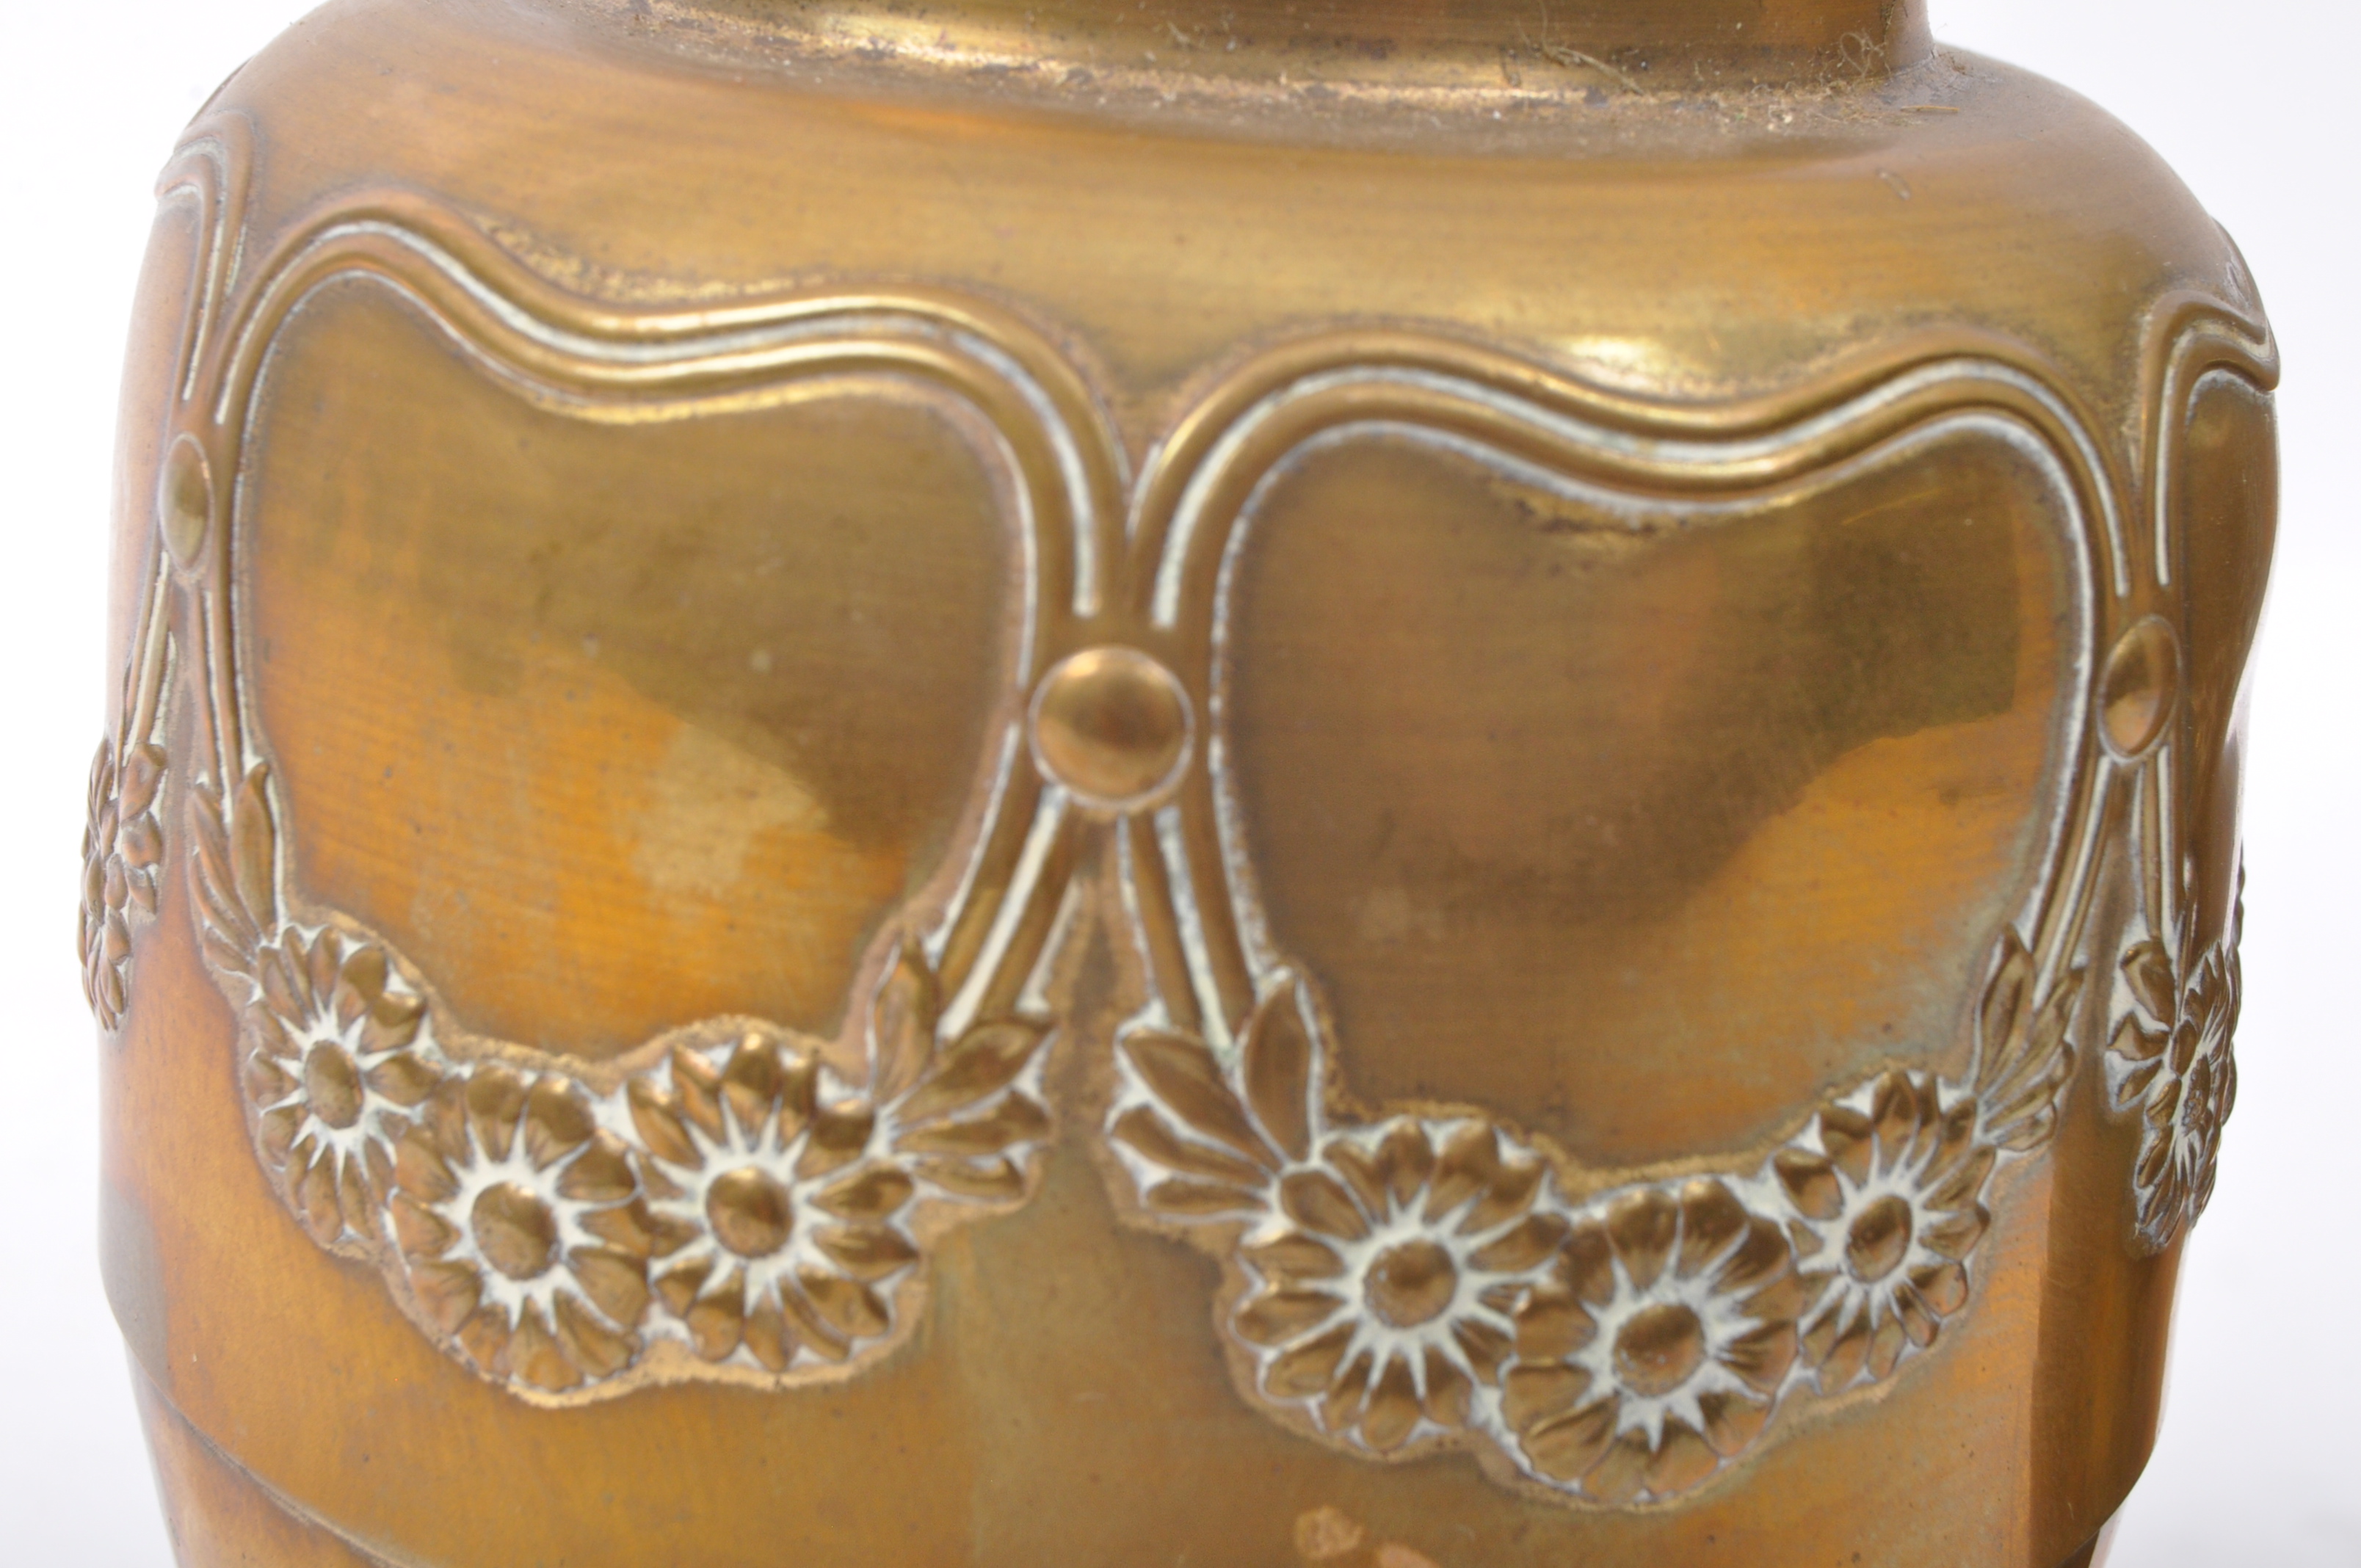 PAIR OF EARLY 20TH CENTURY GERMAN WMF ART NOUVEAU VASES - Image 4 of 6